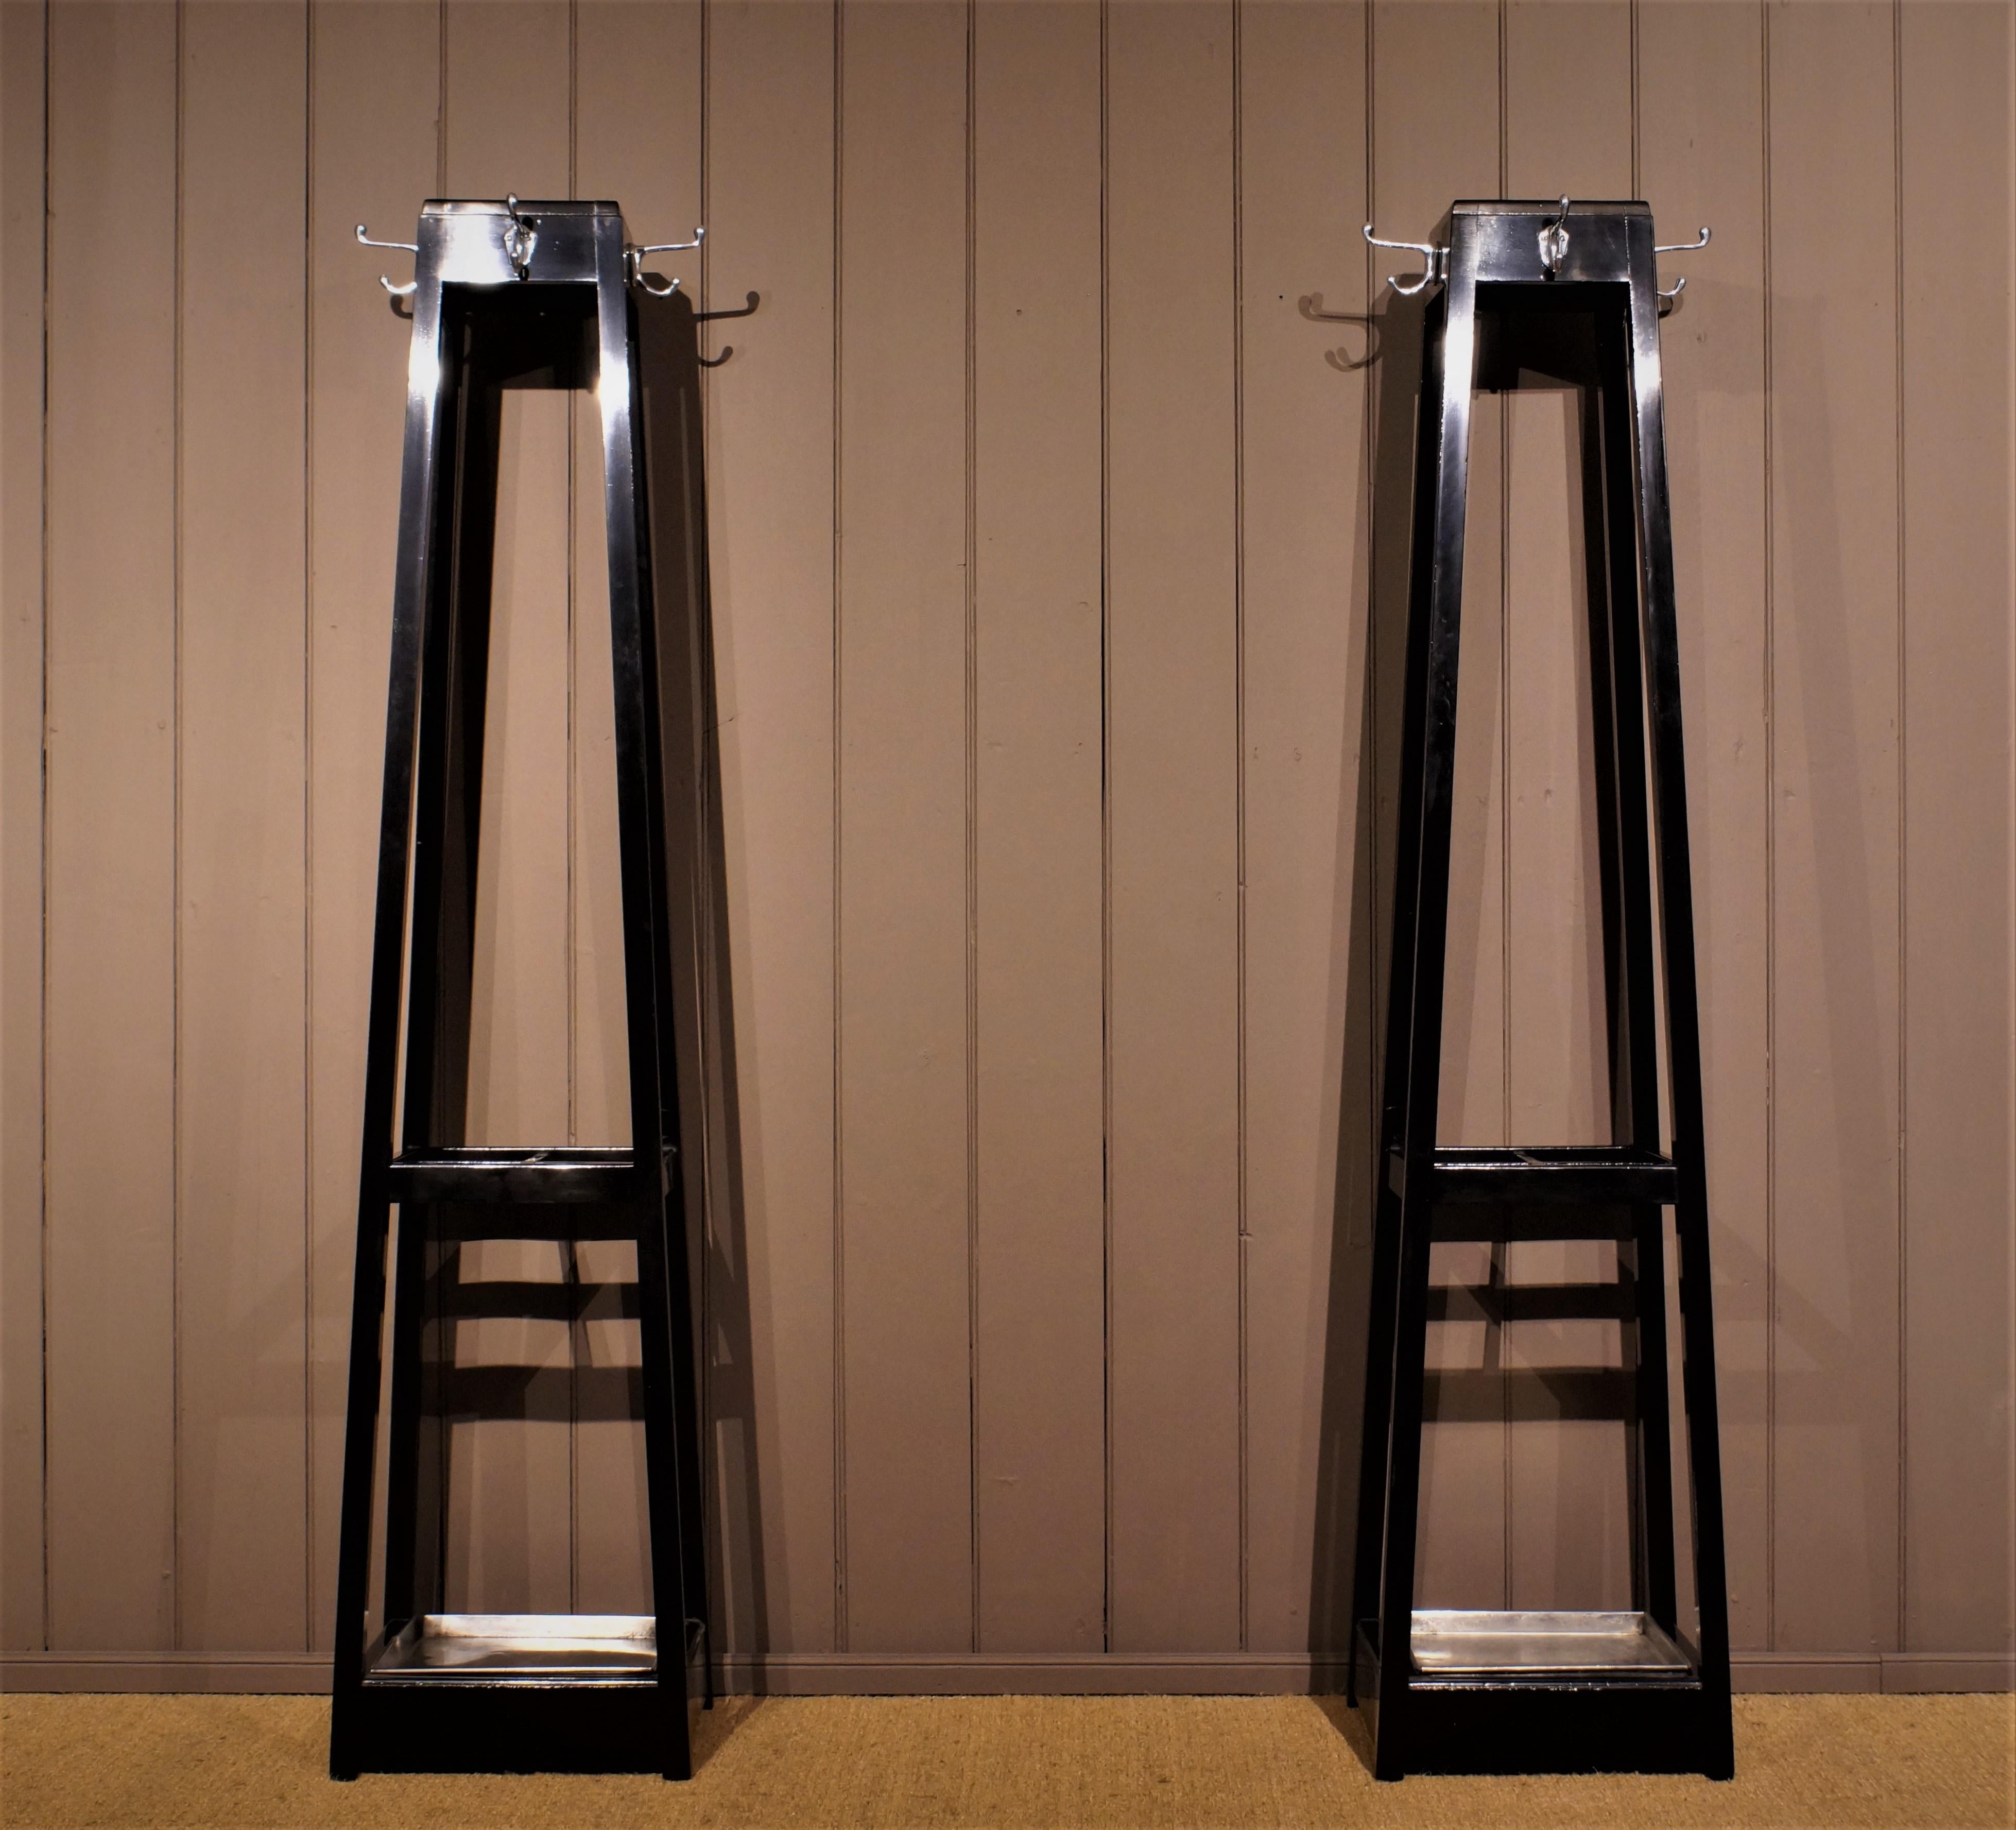 Of pyramidal, pylon or rig form these sleek and elegant stands have chrome hooks and four sections for sticks and umbrellas.
Incredibly stylish this rare pair retain their original metal trays.